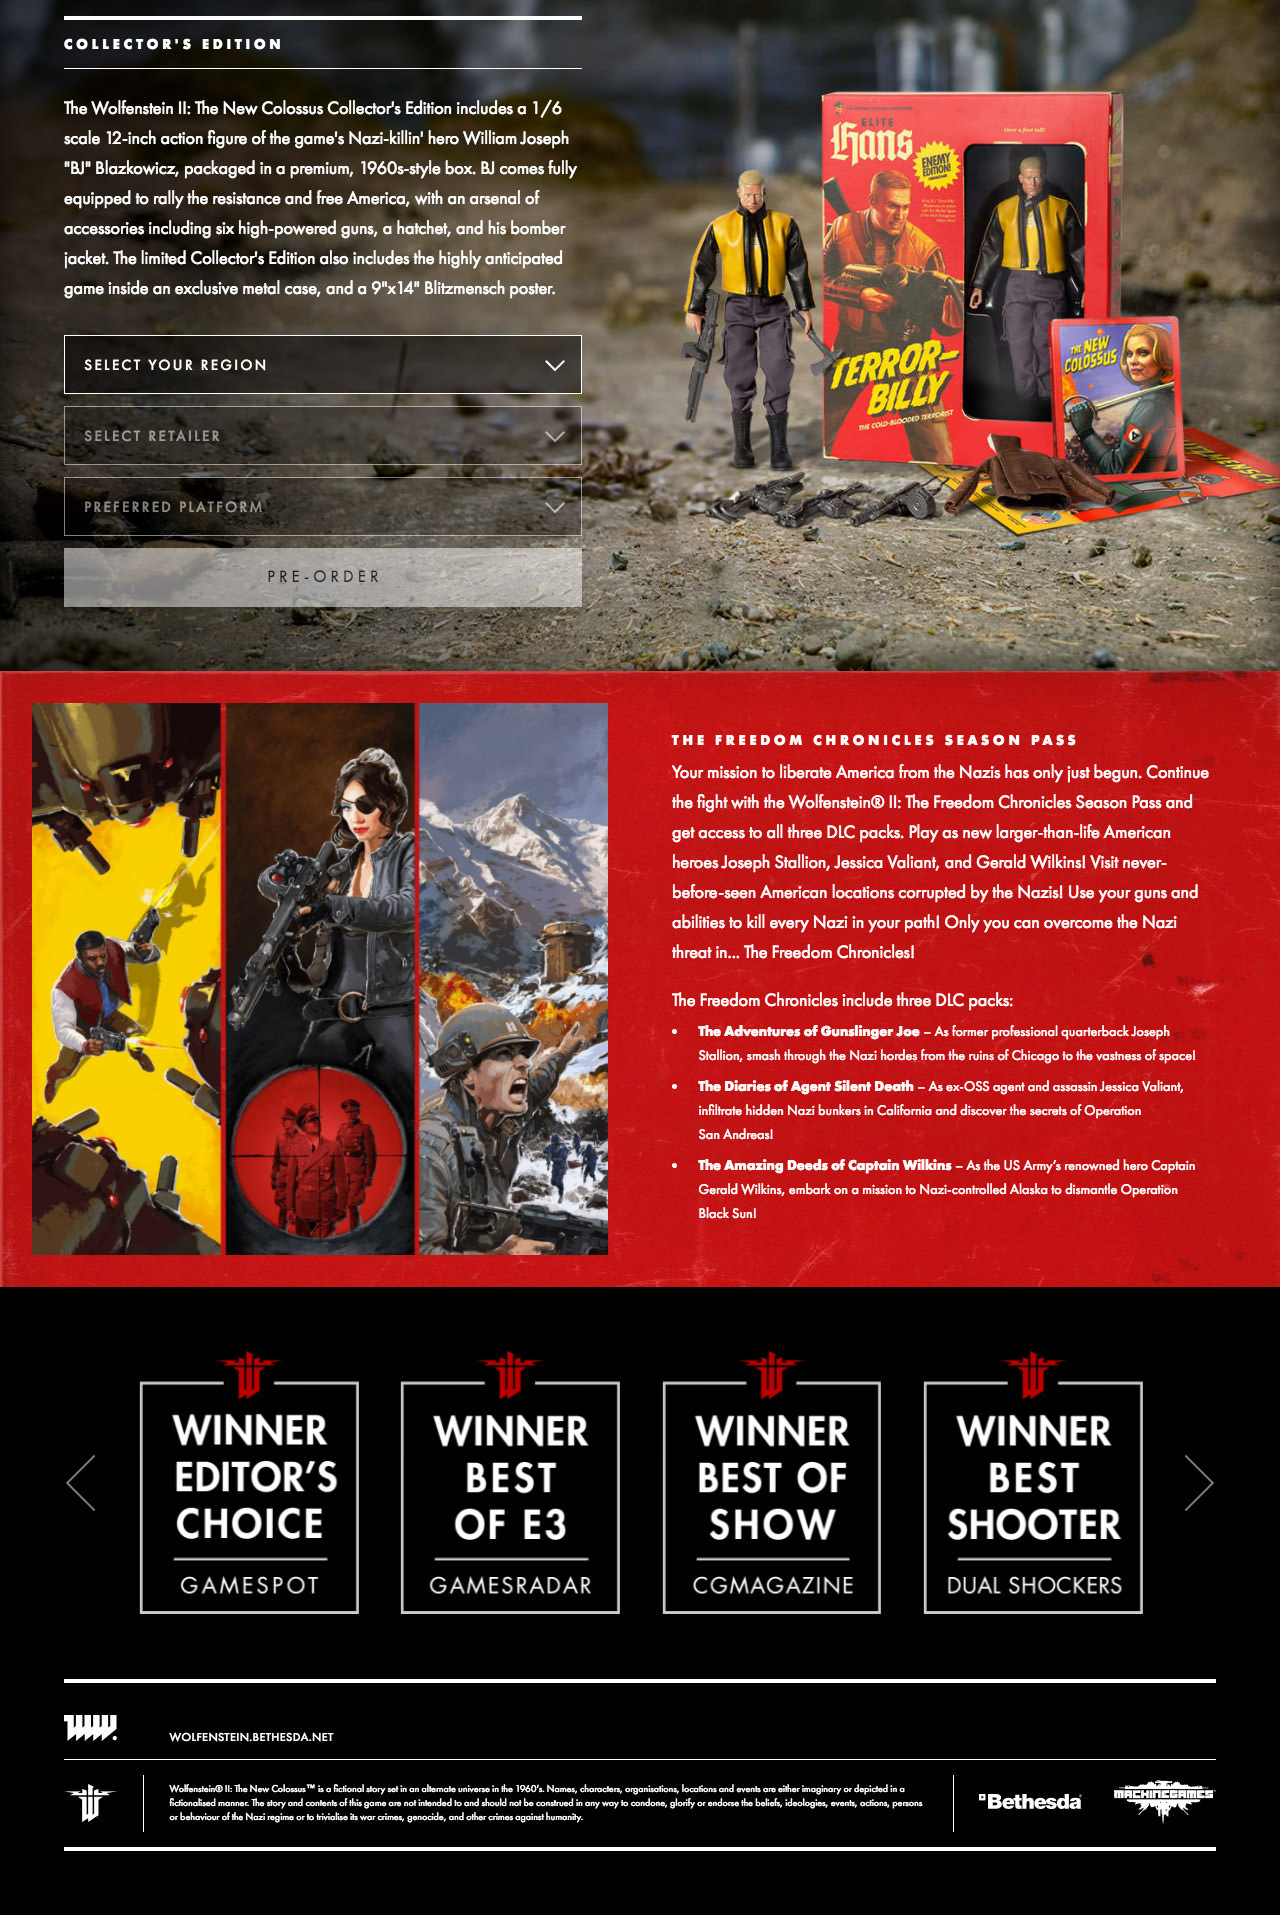 Pre-order page design for the Wolfenstein II site